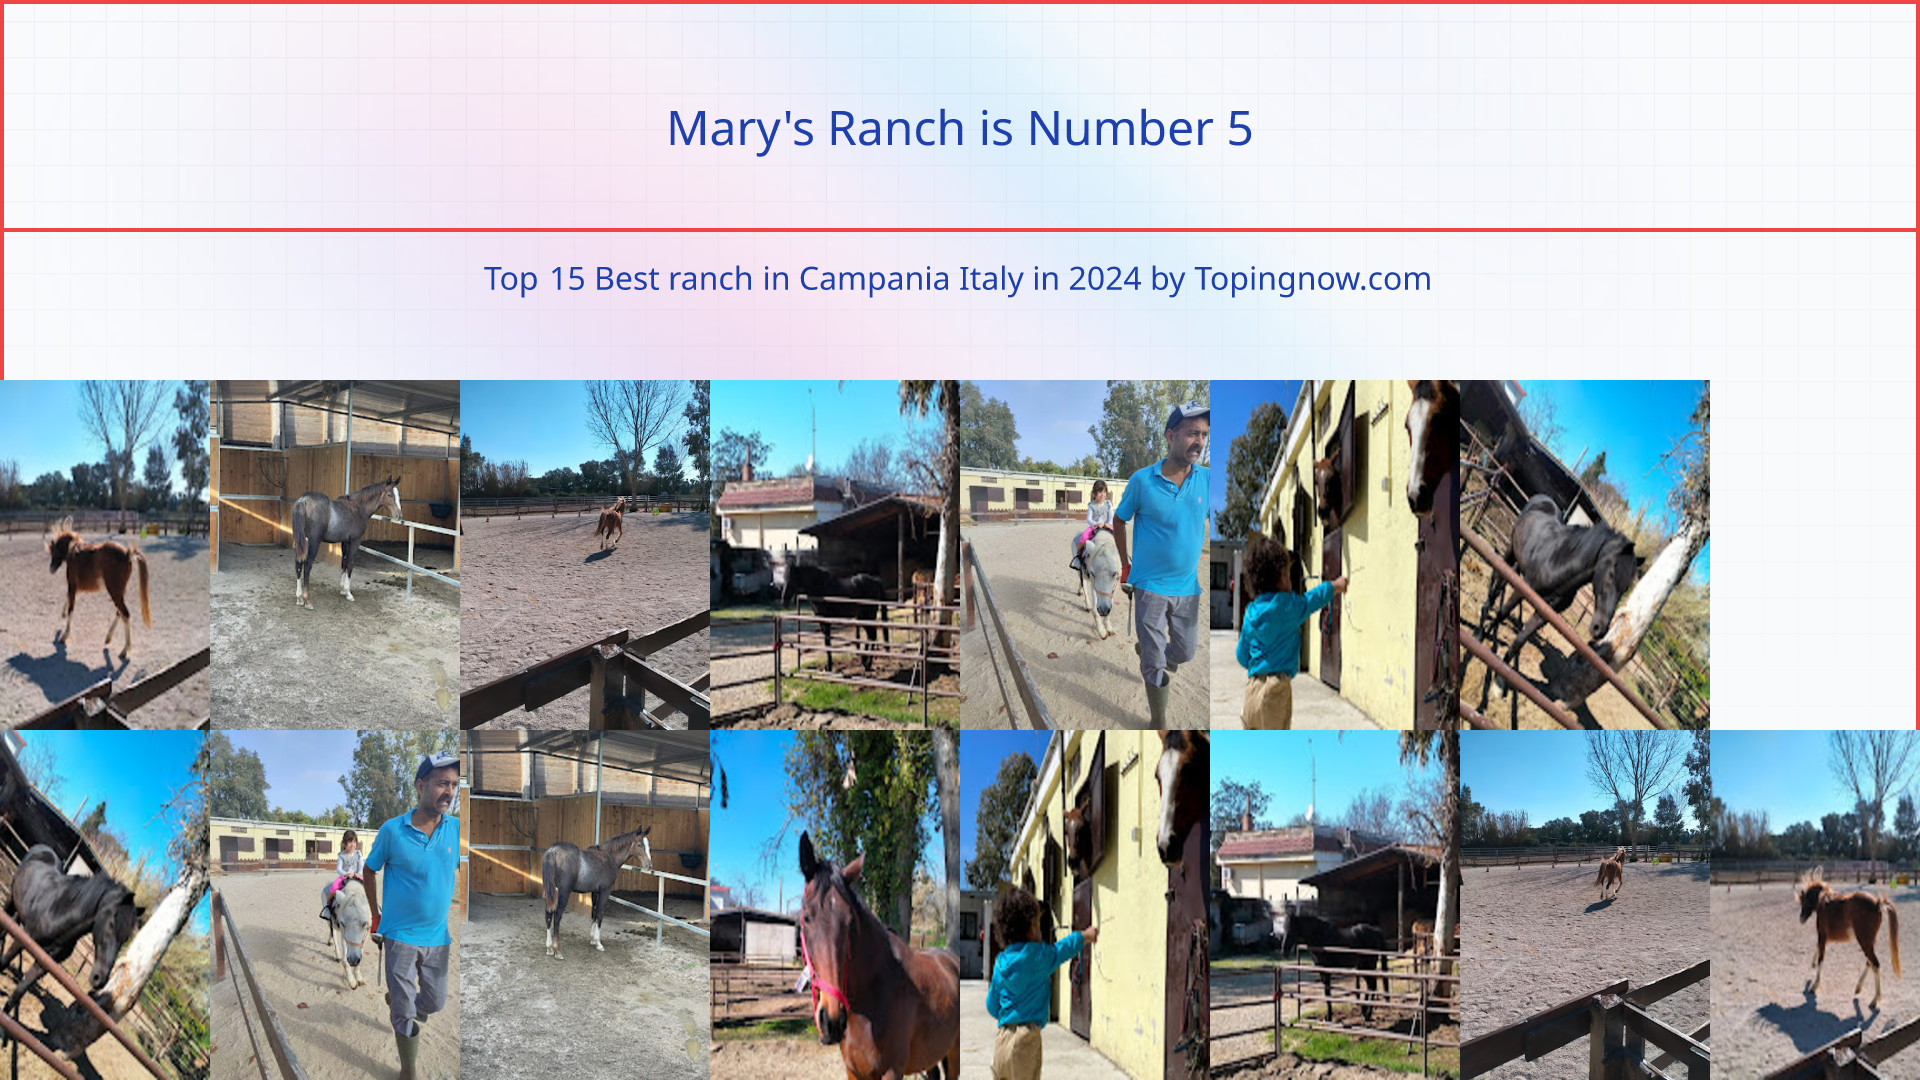 Mary's Ranch: Top 15 Best ranch in Campania Italy in 2024